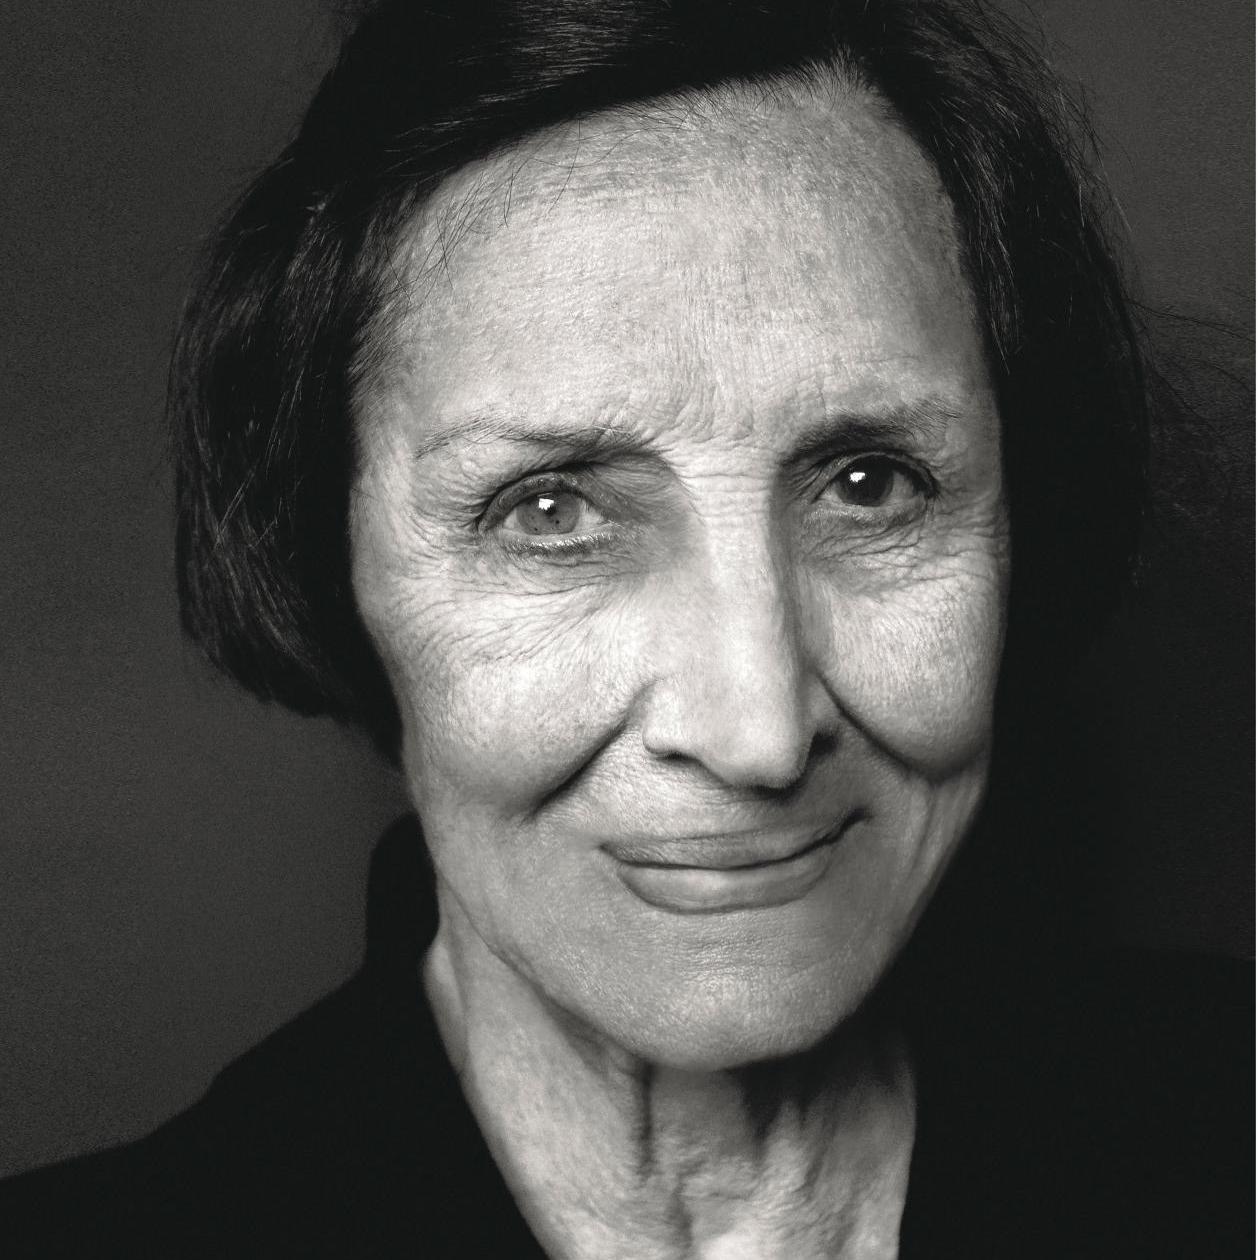 Françoise Gilot, Life Story of an Artist and a Free Woman - Interviews